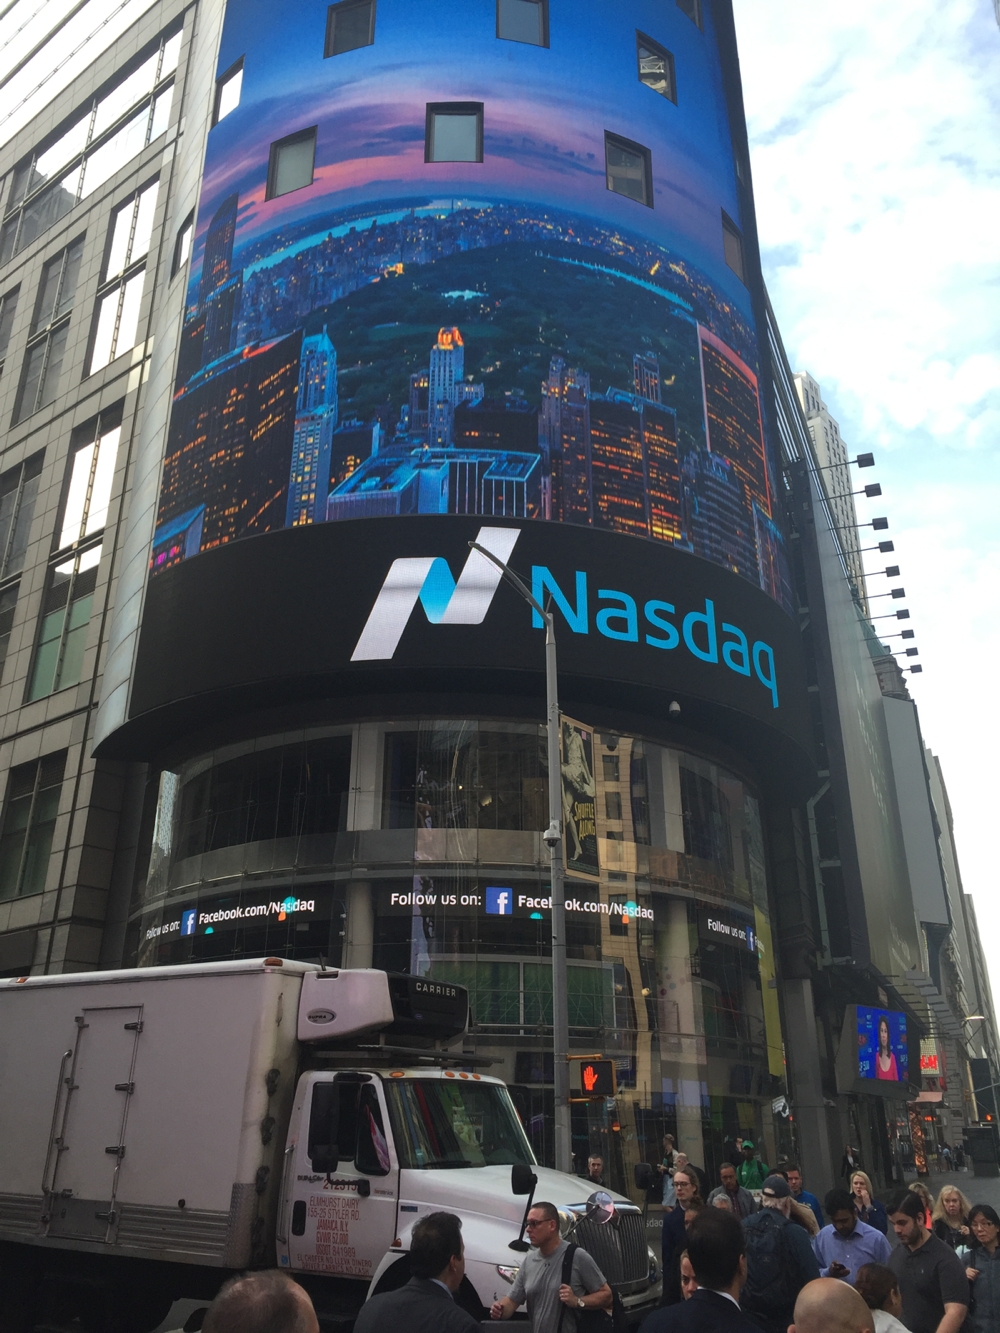 NASDAQ screen from time square